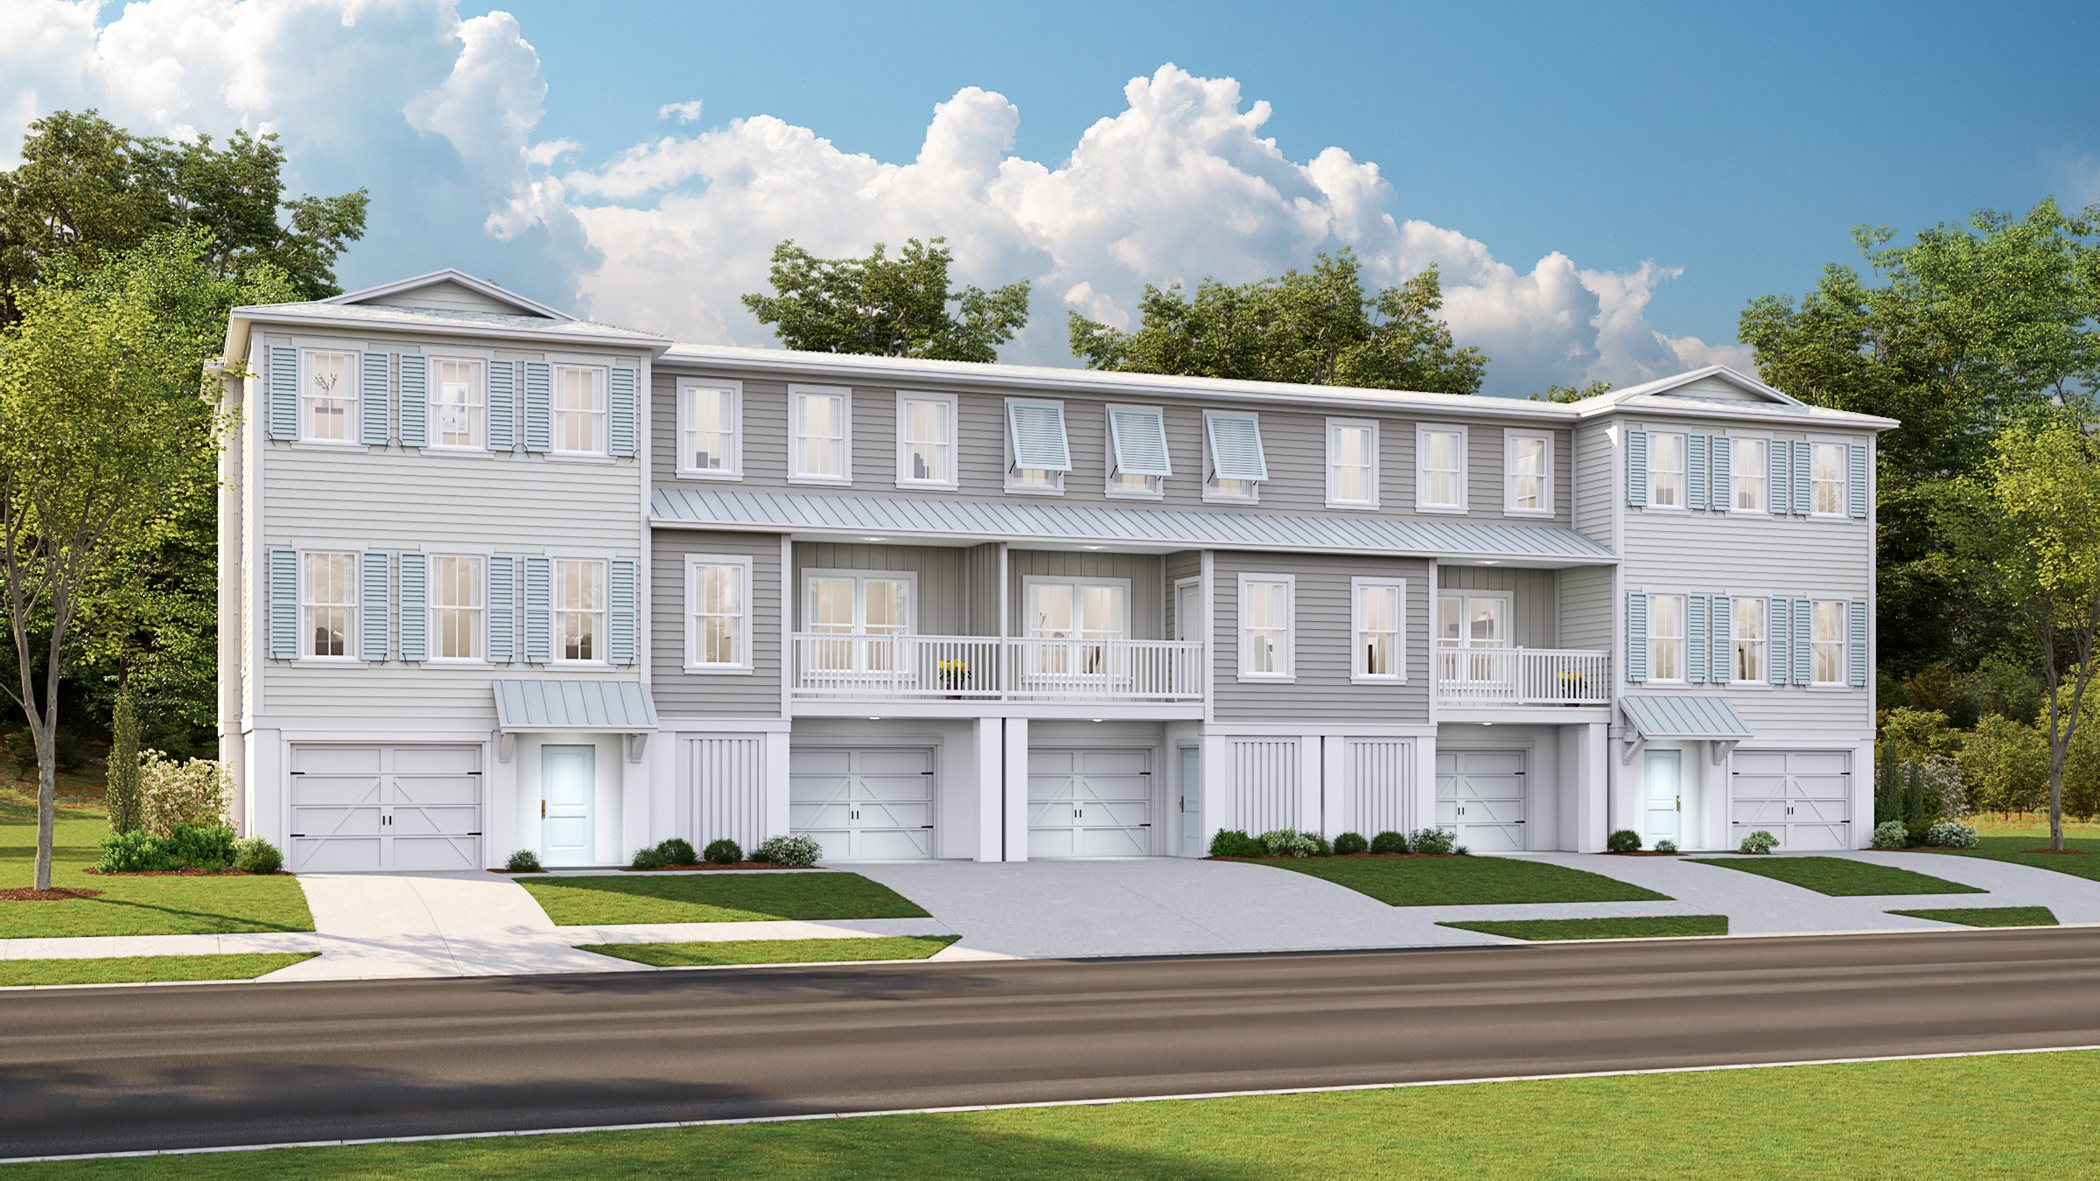 Governor's Cay Townhomes